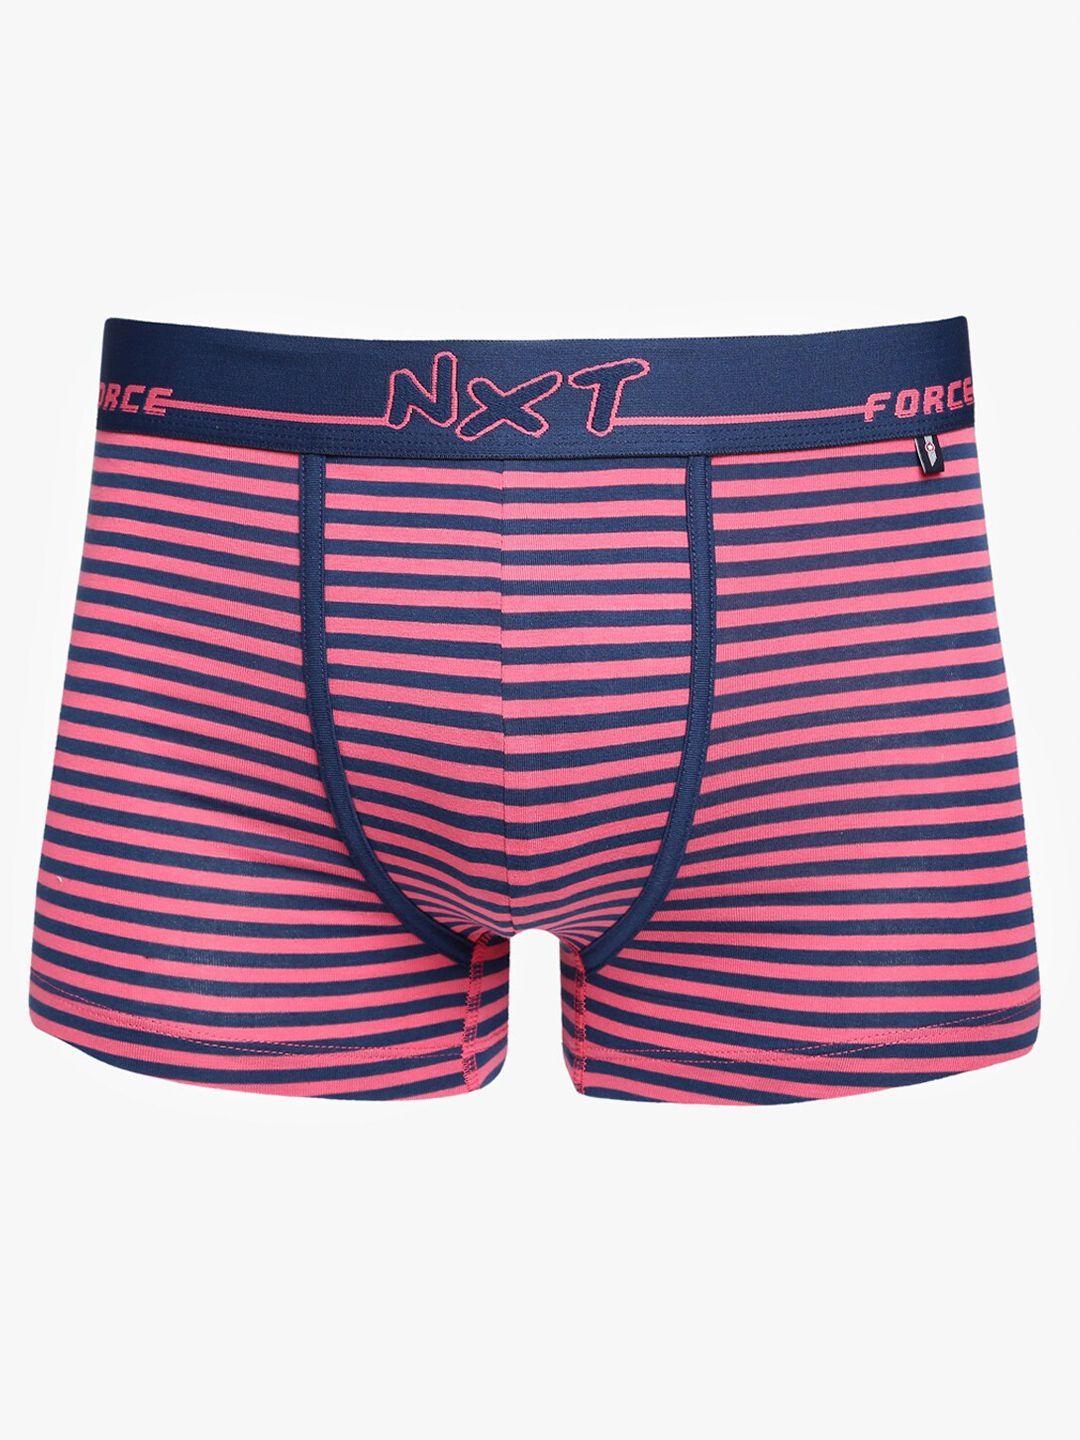 force nxt striped short cotton trunk mnfl-66-pink-po1-pink